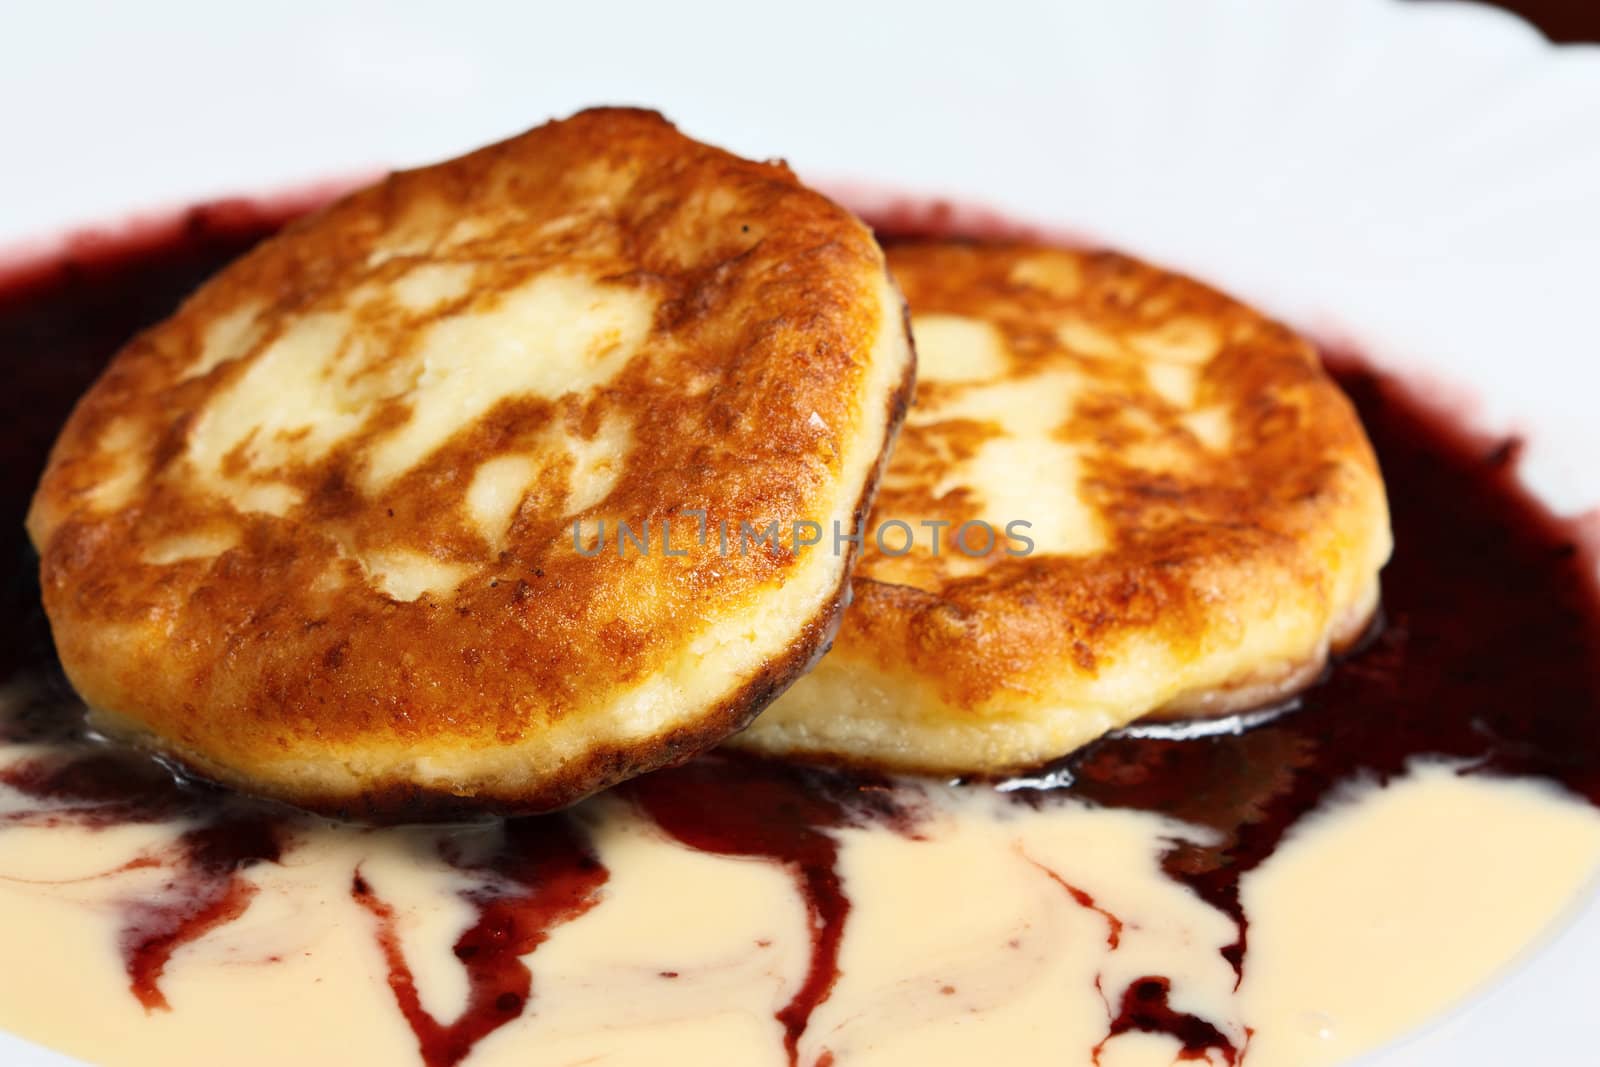 pancakes on a white background with jam.